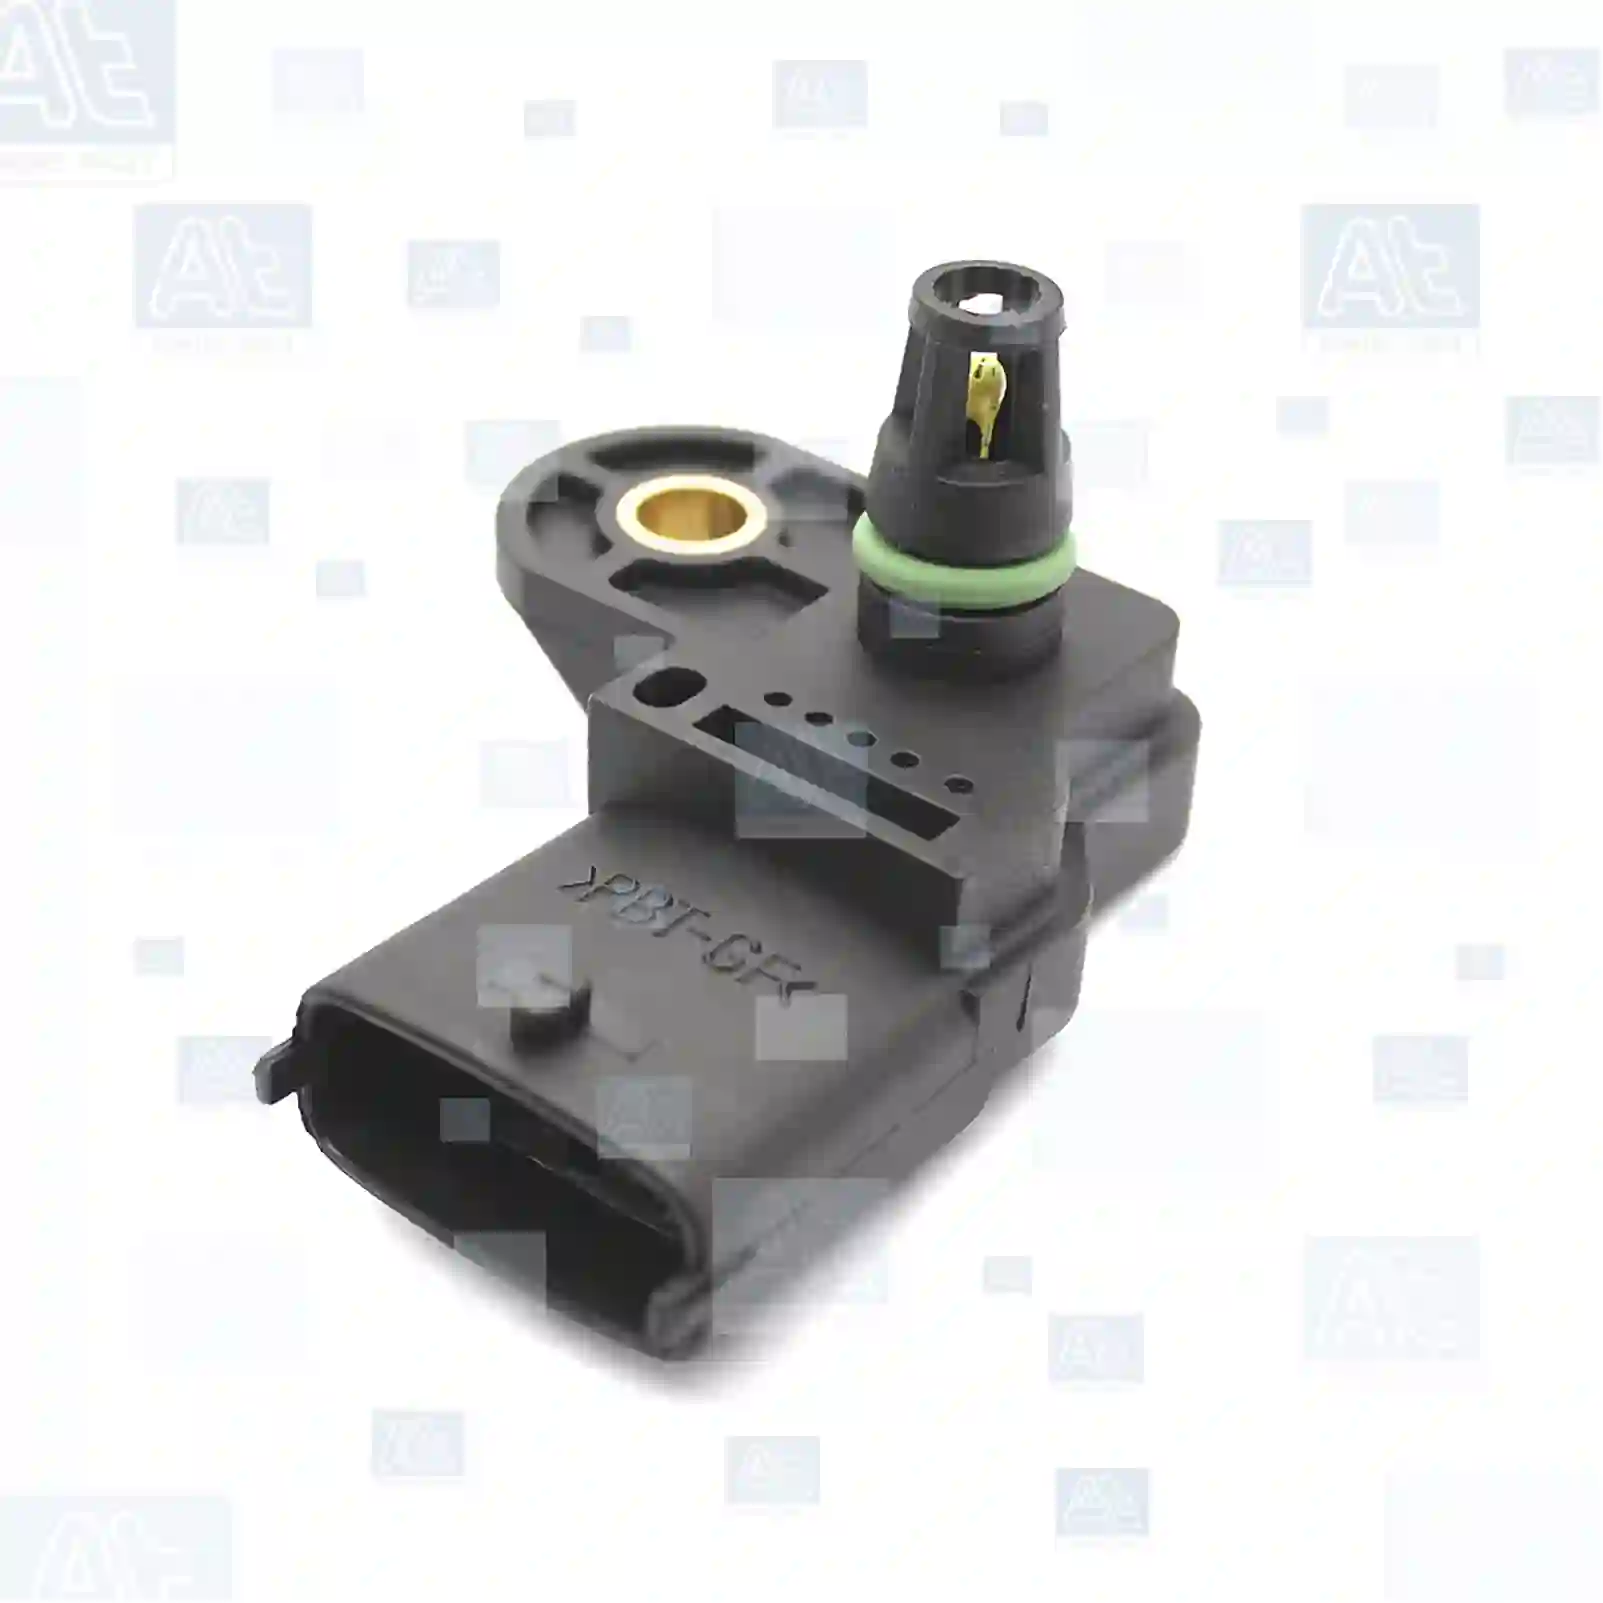 Charge pressure sensor, 77711400, 836666980, 6112001370003, 504073323, 2S0906051, 2852821, 3968437, 5010437653, D5010437653, 612630120004, V836666980000, 504073323, 2C4612A697AA, 501073323, 504073323, 5010437653, 004510411110129088, 201149033, 04194078, 504073323, 02852821, 5010437653, 5010450894, 2S0906051, 836666980, 2S0906051, 2S0906051 ||  77711400 At Spare Part | Engine, Accelerator Pedal, Camshaft, Connecting Rod, Crankcase, Crankshaft, Cylinder Head, Engine Suspension Mountings, Exhaust Manifold, Exhaust Gas Recirculation, Filter Kits, Flywheel Housing, General Overhaul Kits, Engine, Intake Manifold, Oil Cleaner, Oil Cooler, Oil Filter, Oil Pump, Oil Sump, Piston & Liner, Sensor & Switch, Timing Case, Turbocharger, Cooling System, Belt Tensioner, Coolant Filter, Coolant Pipe, Corrosion Prevention Agent, Drive, Expansion Tank, Fan, Intercooler, Monitors & Gauges, Radiator, Thermostat, V-Belt / Timing belt, Water Pump, Fuel System, Electronical Injector Unit, Feed Pump, Fuel Filter, cpl., Fuel Gauge Sender,  Fuel Line, Fuel Pump, Fuel Tank, Injection Line Kit, Injection Pump, Exhaust System, Clutch & Pedal, Gearbox, Propeller Shaft, Axles, Brake System, Hubs & Wheels, Suspension, Leaf Spring, Universal Parts / Accessories, Steering, Electrical System, Cabin Charge pressure sensor, 77711400, 836666980, 6112001370003, 504073323, 2S0906051, 2852821, 3968437, 5010437653, D5010437653, 612630120004, V836666980000, 504073323, 2C4612A697AA, 501073323, 504073323, 5010437653, 004510411110129088, 201149033, 04194078, 504073323, 02852821, 5010437653, 5010450894, 2S0906051, 836666980, 2S0906051, 2S0906051 ||  77711400 At Spare Part | Engine, Accelerator Pedal, Camshaft, Connecting Rod, Crankcase, Crankshaft, Cylinder Head, Engine Suspension Mountings, Exhaust Manifold, Exhaust Gas Recirculation, Filter Kits, Flywheel Housing, General Overhaul Kits, Engine, Intake Manifold, Oil Cleaner, Oil Cooler, Oil Filter, Oil Pump, Oil Sump, Piston & Liner, Sensor & Switch, Timing Case, Turbocharger, Cooling System, Belt Tensioner, Coolant Filter, Coolant Pipe, Corrosion Prevention Agent, Drive, Expansion Tank, Fan, Intercooler, Monitors & Gauges, Radiator, Thermostat, V-Belt / Timing belt, Water Pump, Fuel System, Electronical Injector Unit, Feed Pump, Fuel Filter, cpl., Fuel Gauge Sender,  Fuel Line, Fuel Pump, Fuel Tank, Injection Line Kit, Injection Pump, Exhaust System, Clutch & Pedal, Gearbox, Propeller Shaft, Axles, Brake System, Hubs & Wheels, Suspension, Leaf Spring, Universal Parts / Accessories, Steering, Electrical System, Cabin